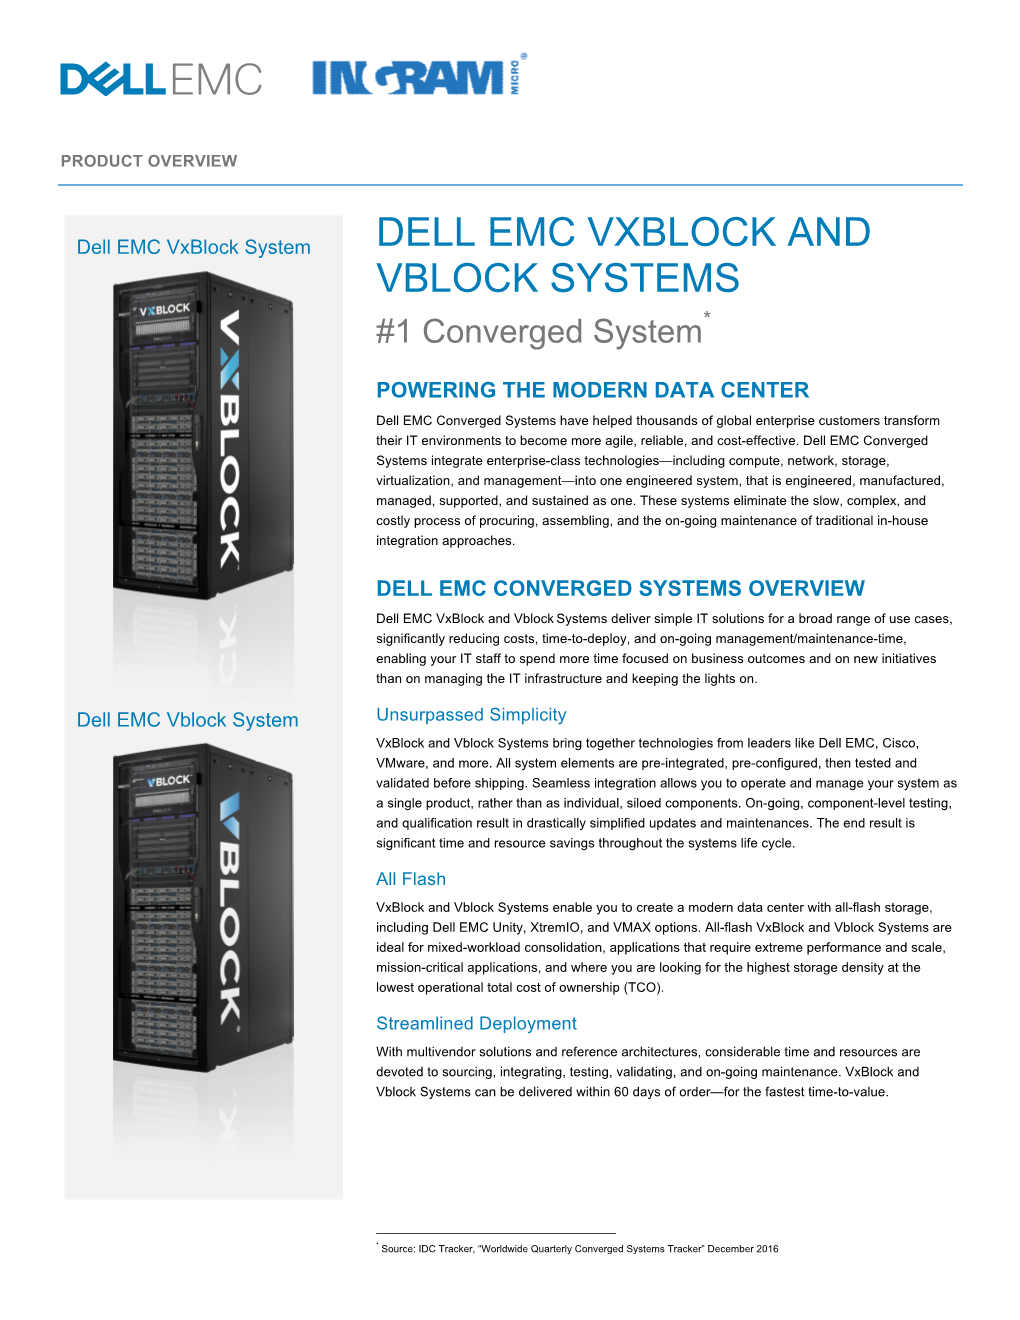 Dell EMC Vxblock and Vblock Product Overview